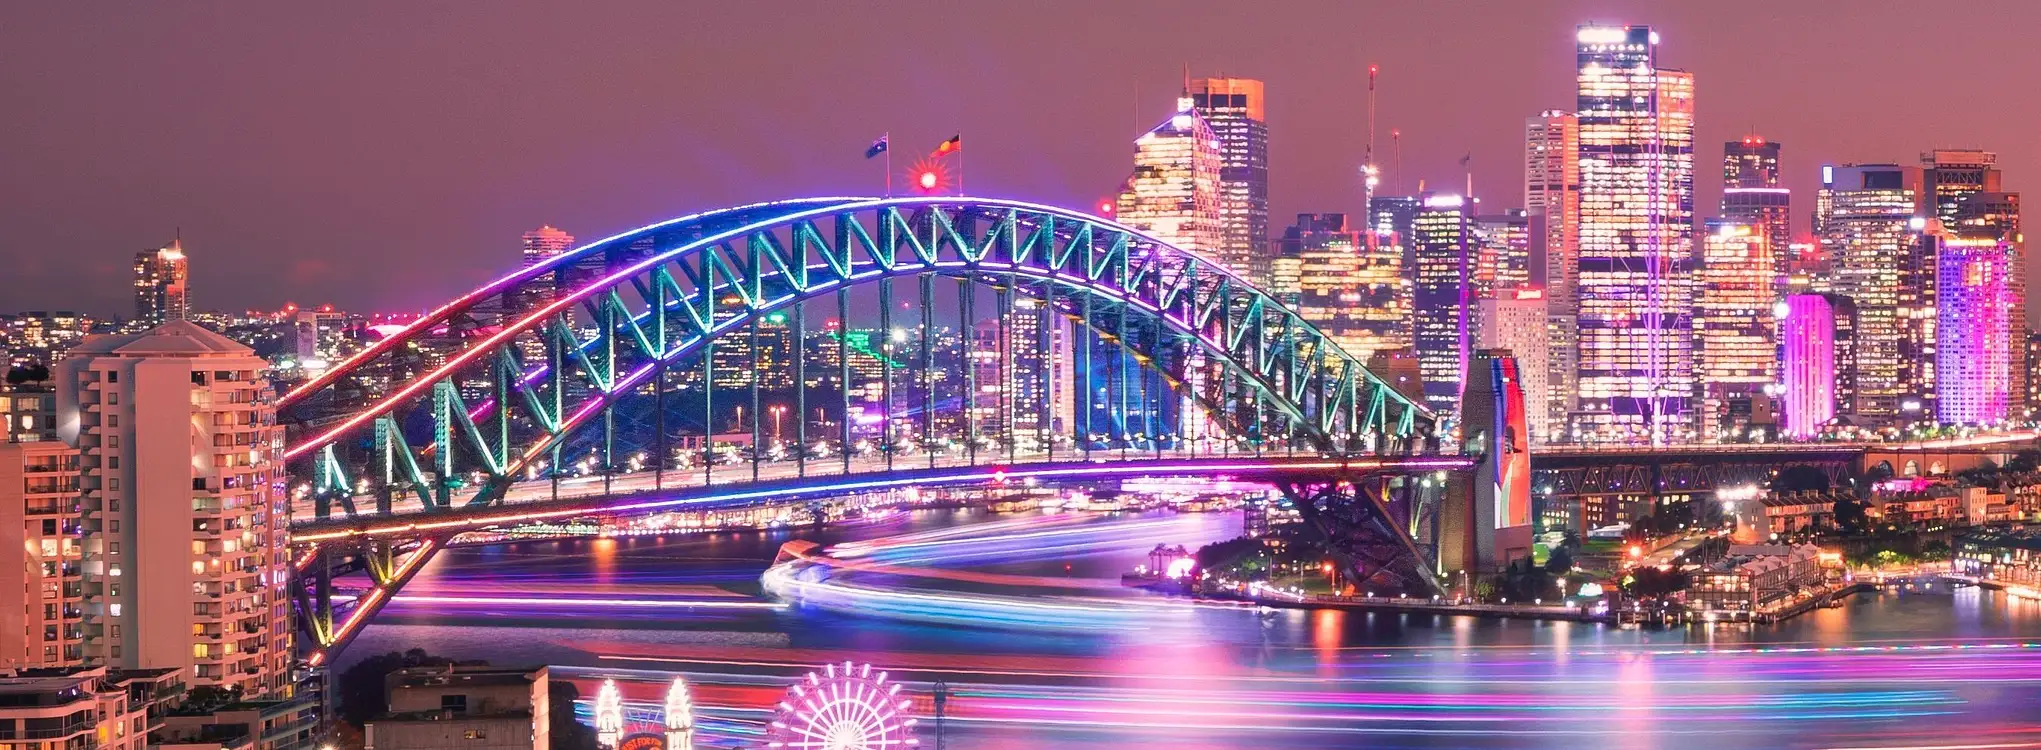 What’s on at Vivid Sydney This Year?